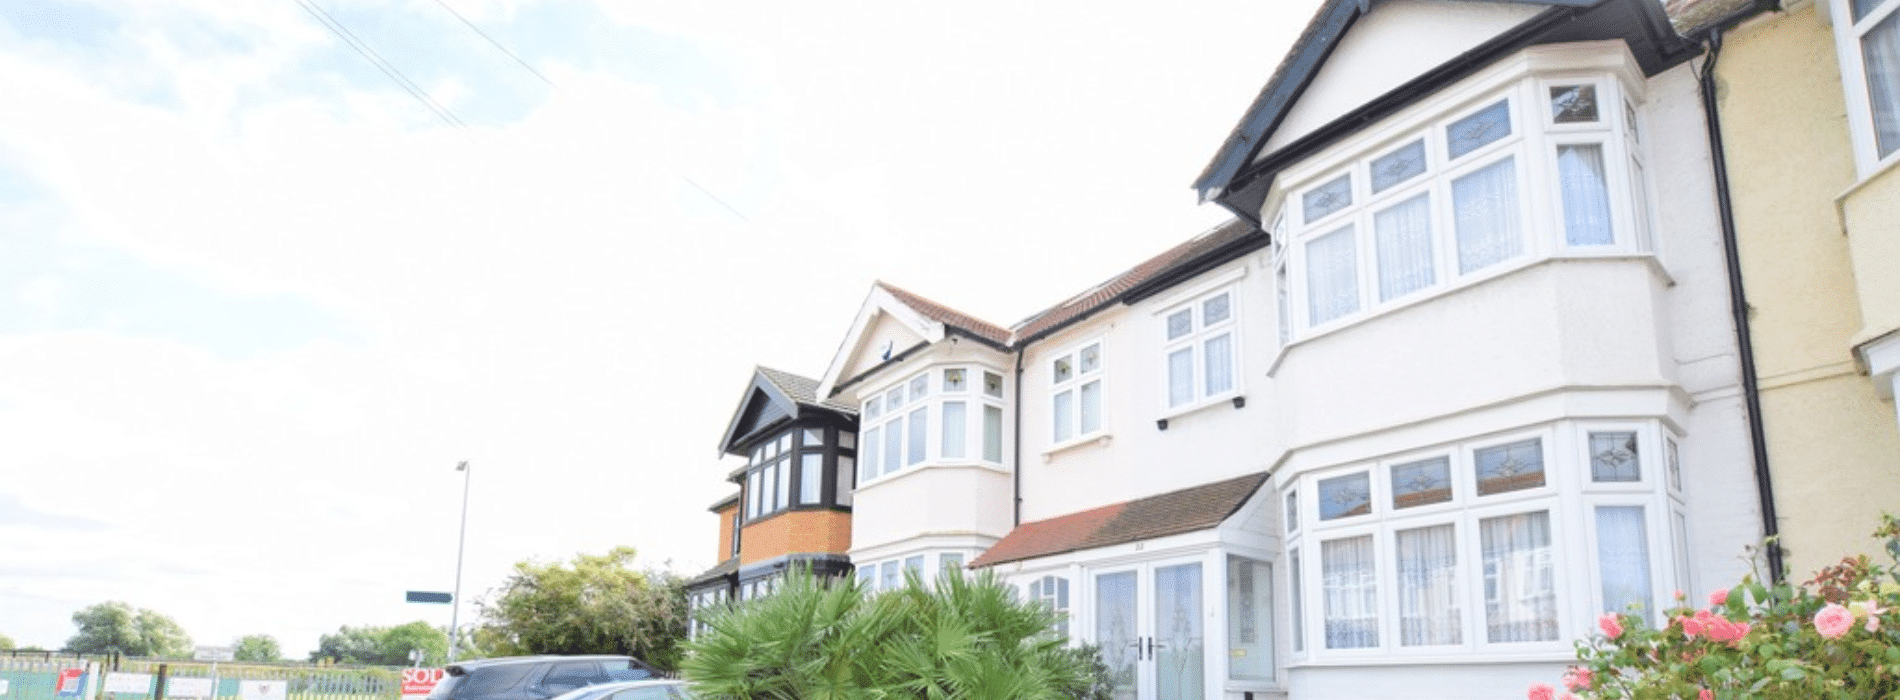 Charming houses in Barkingside, IG6 with original pine floorboards and captivating features.